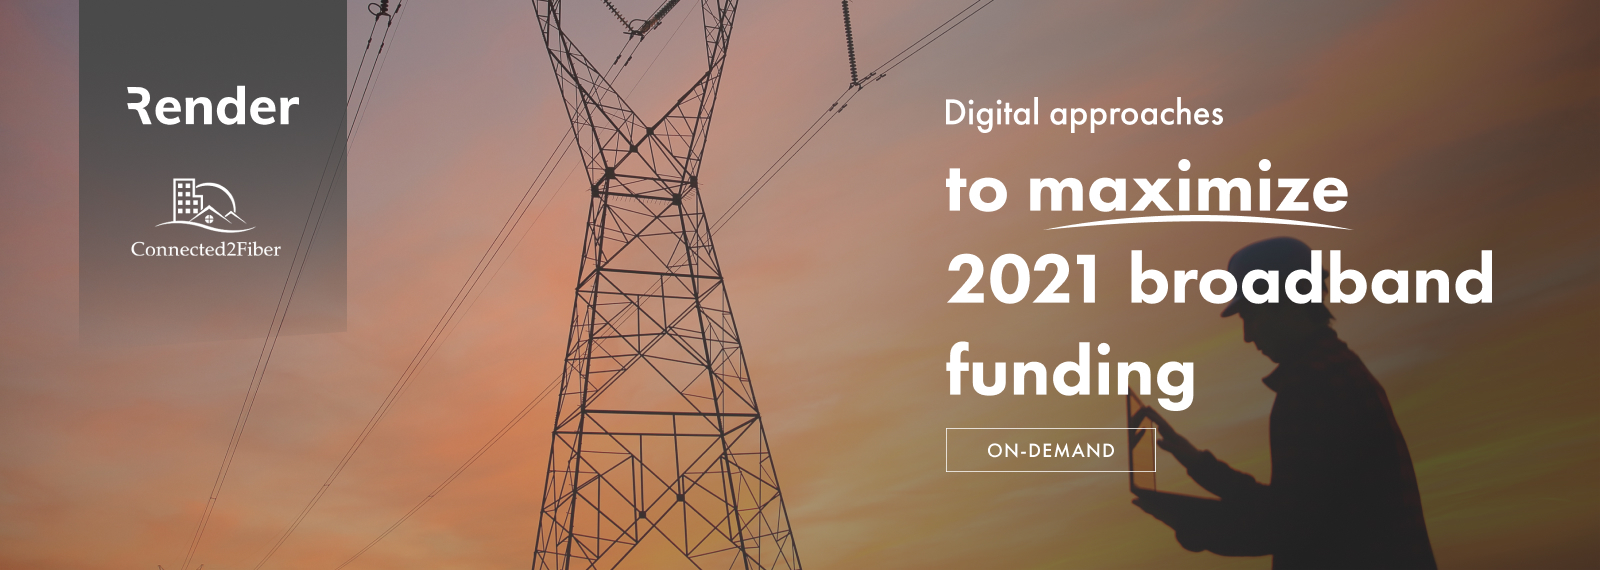 Digital approaches to maximize 2021 broadband funding and grants